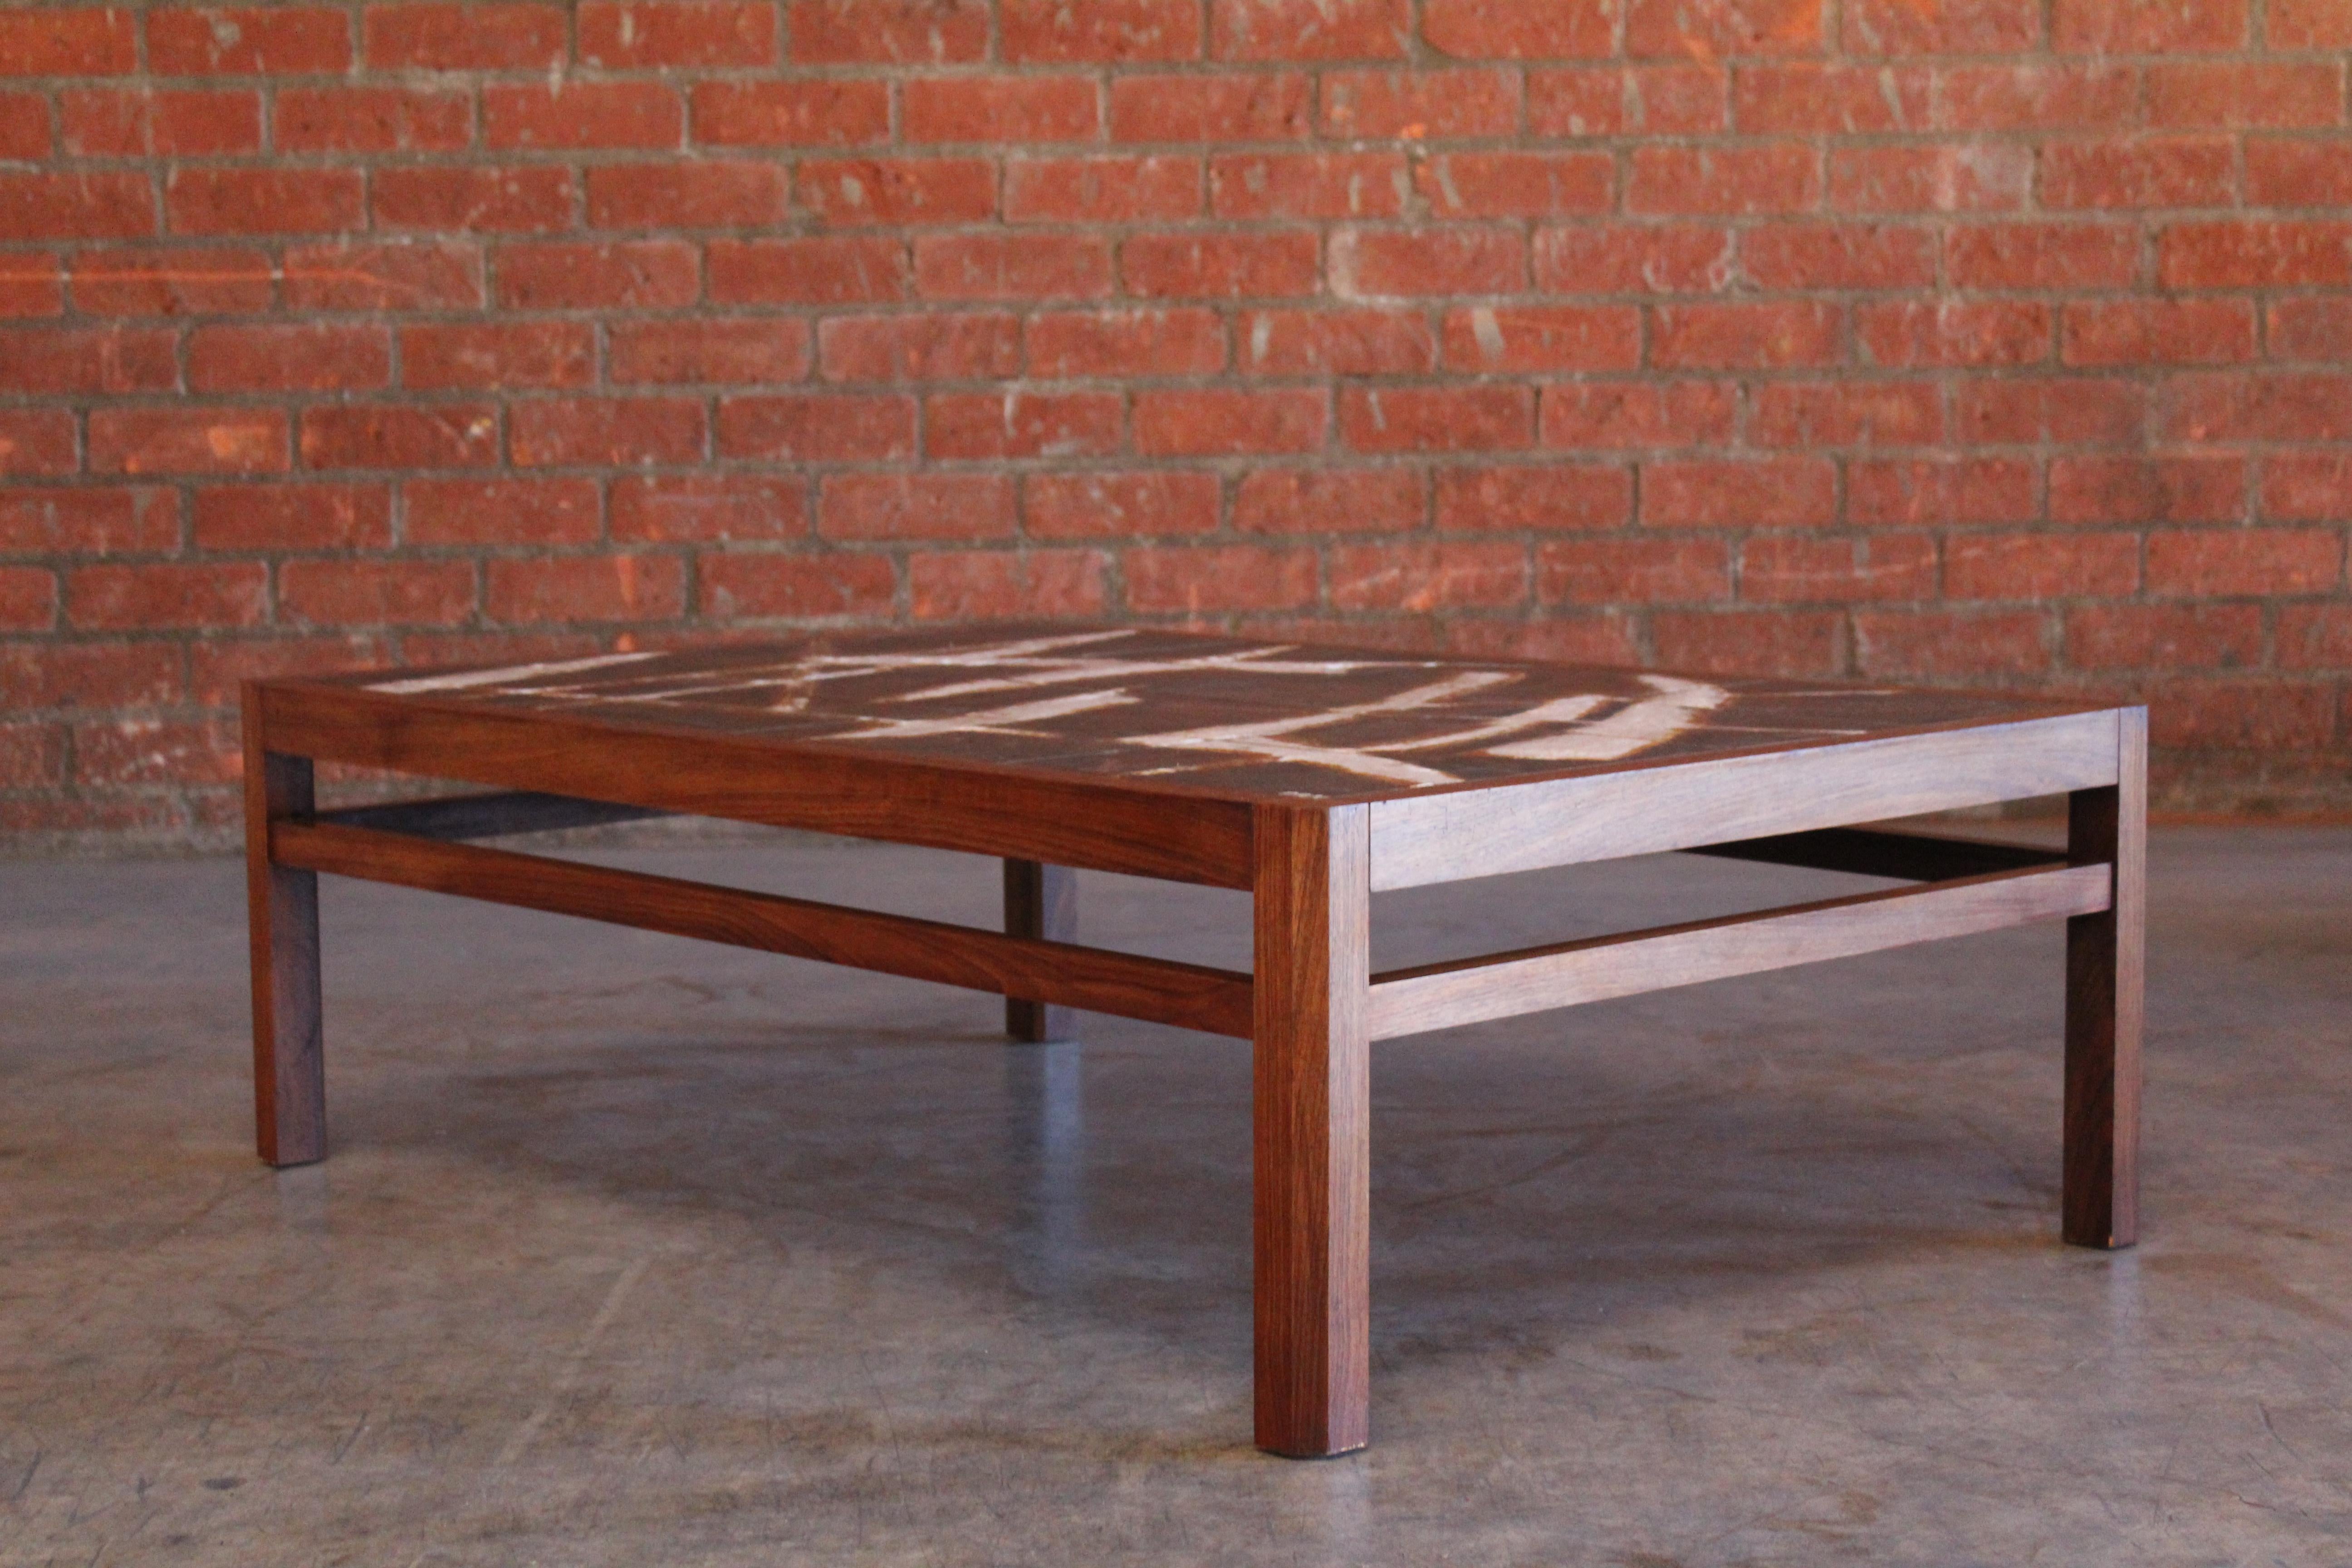 Danish Rosewood and Ceramic Tile Coffee Table by Ole Bjorn Krüger, 1960s For Sale 8